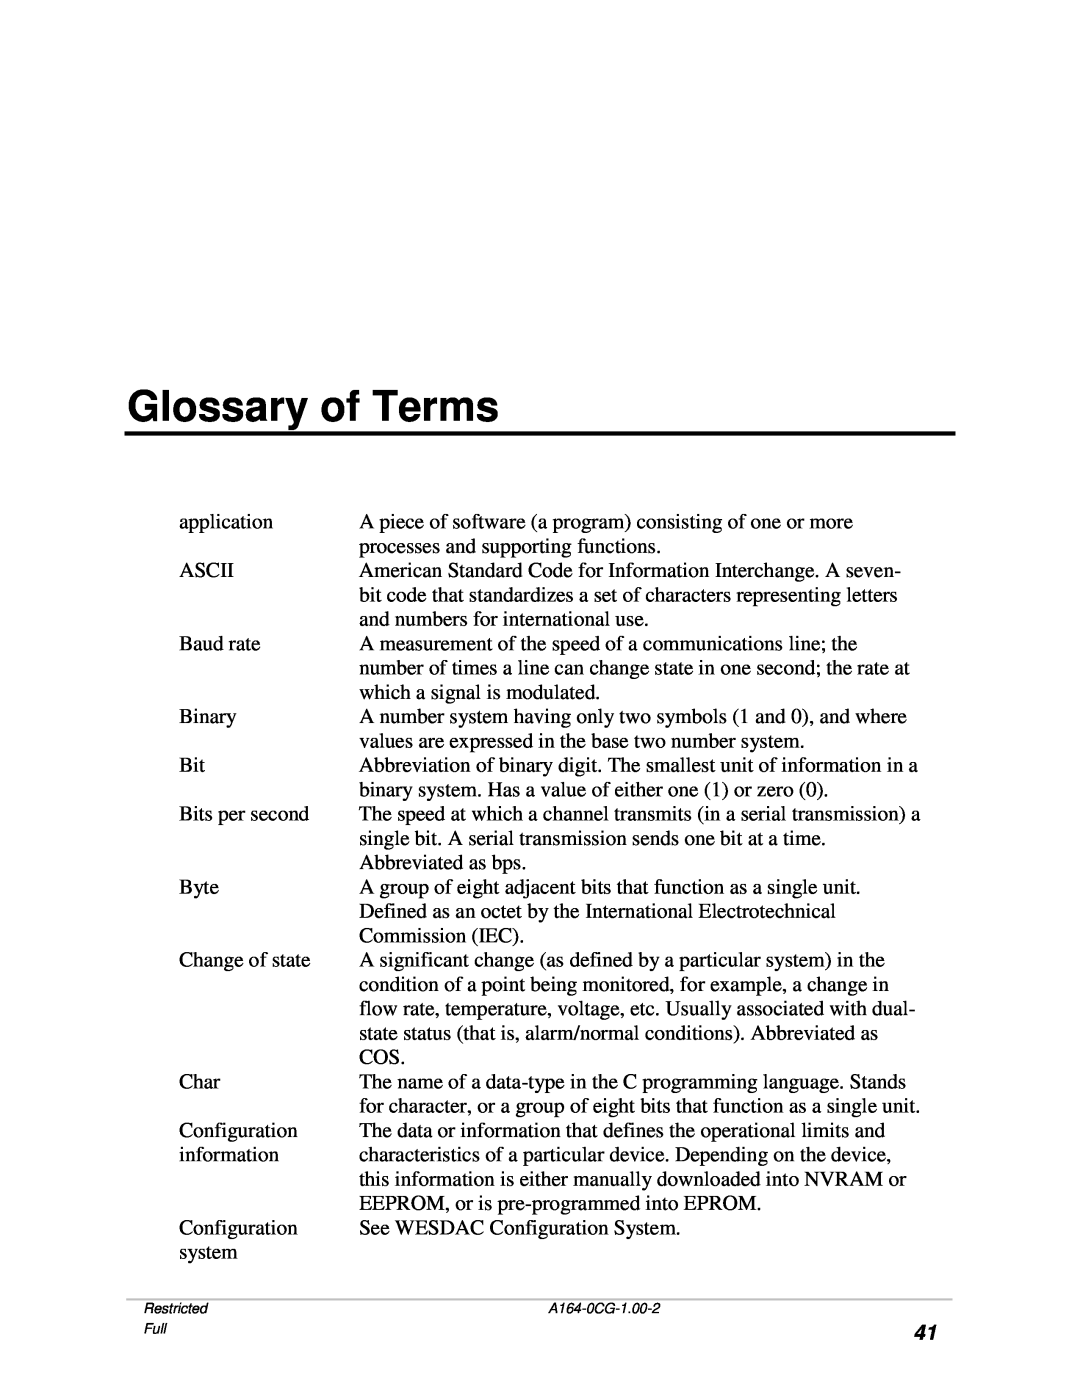 GE BECCO2200 manual Glossary of Terms 